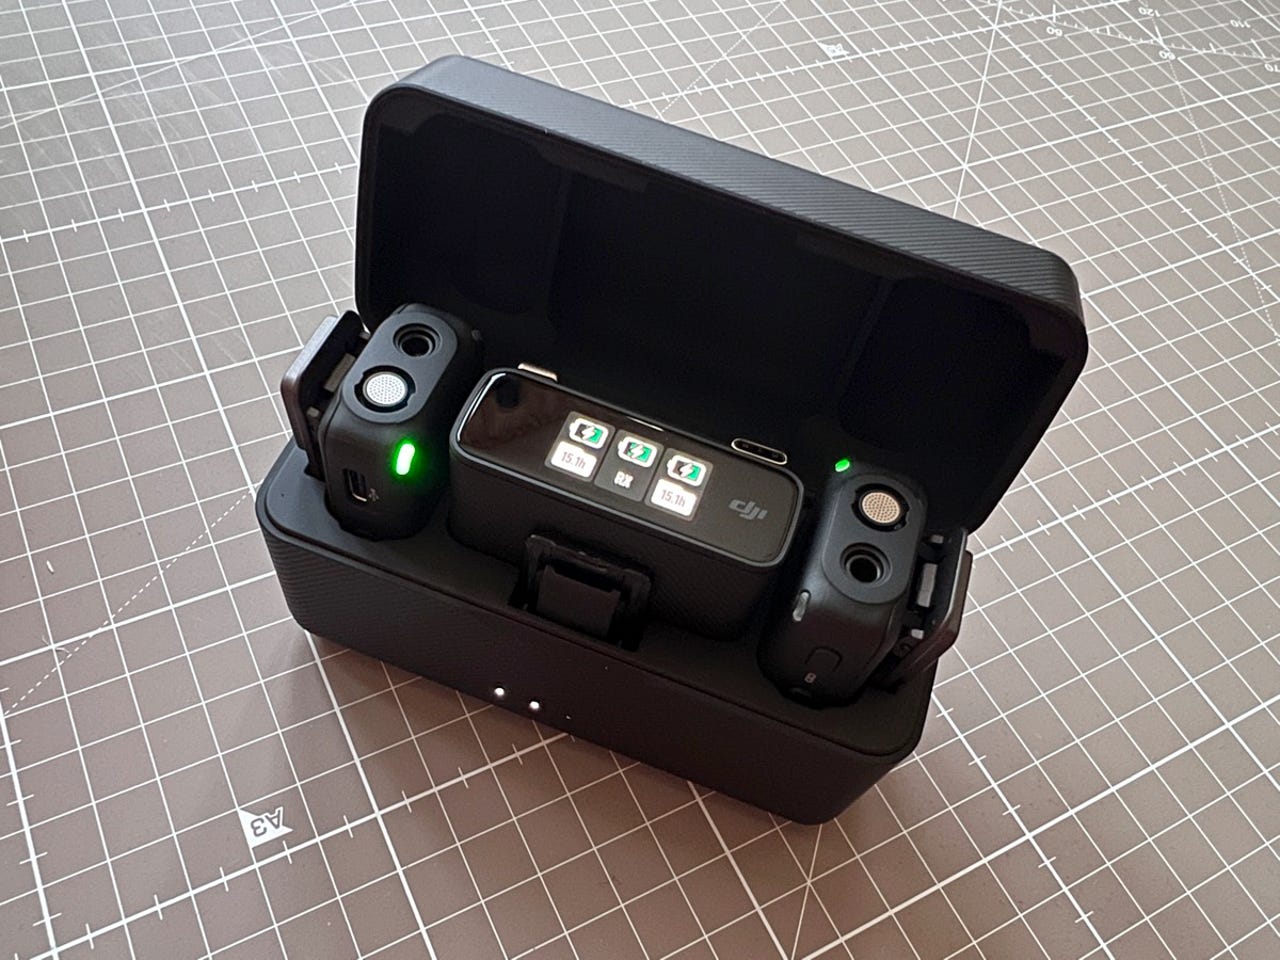 Opening the charging case